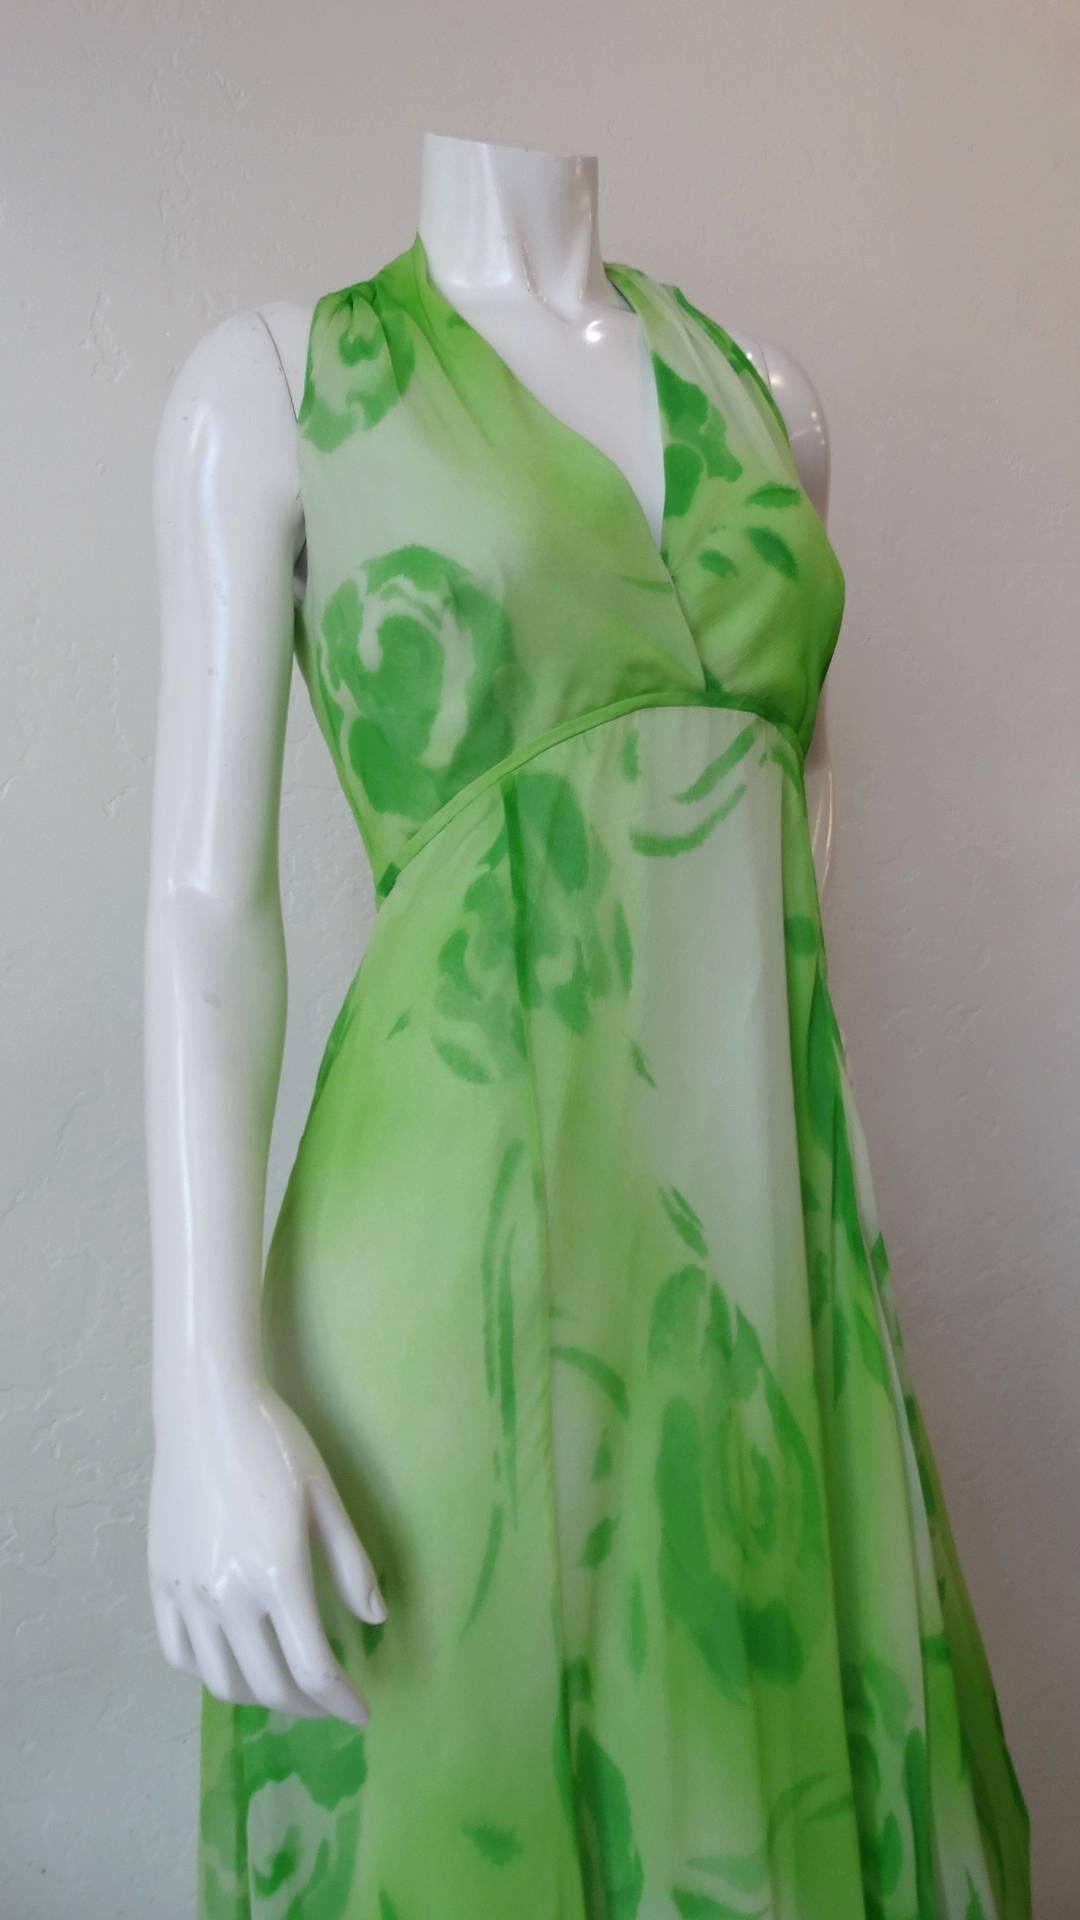 The most adorable 1970s maxi dress from costumer turned ready to wear designer Shannon Rodgers! Made of a rose printed green and white chiffon fabric in a flattering maxi silhouette. Halter-esque neckline with empire waistline just below the bust.